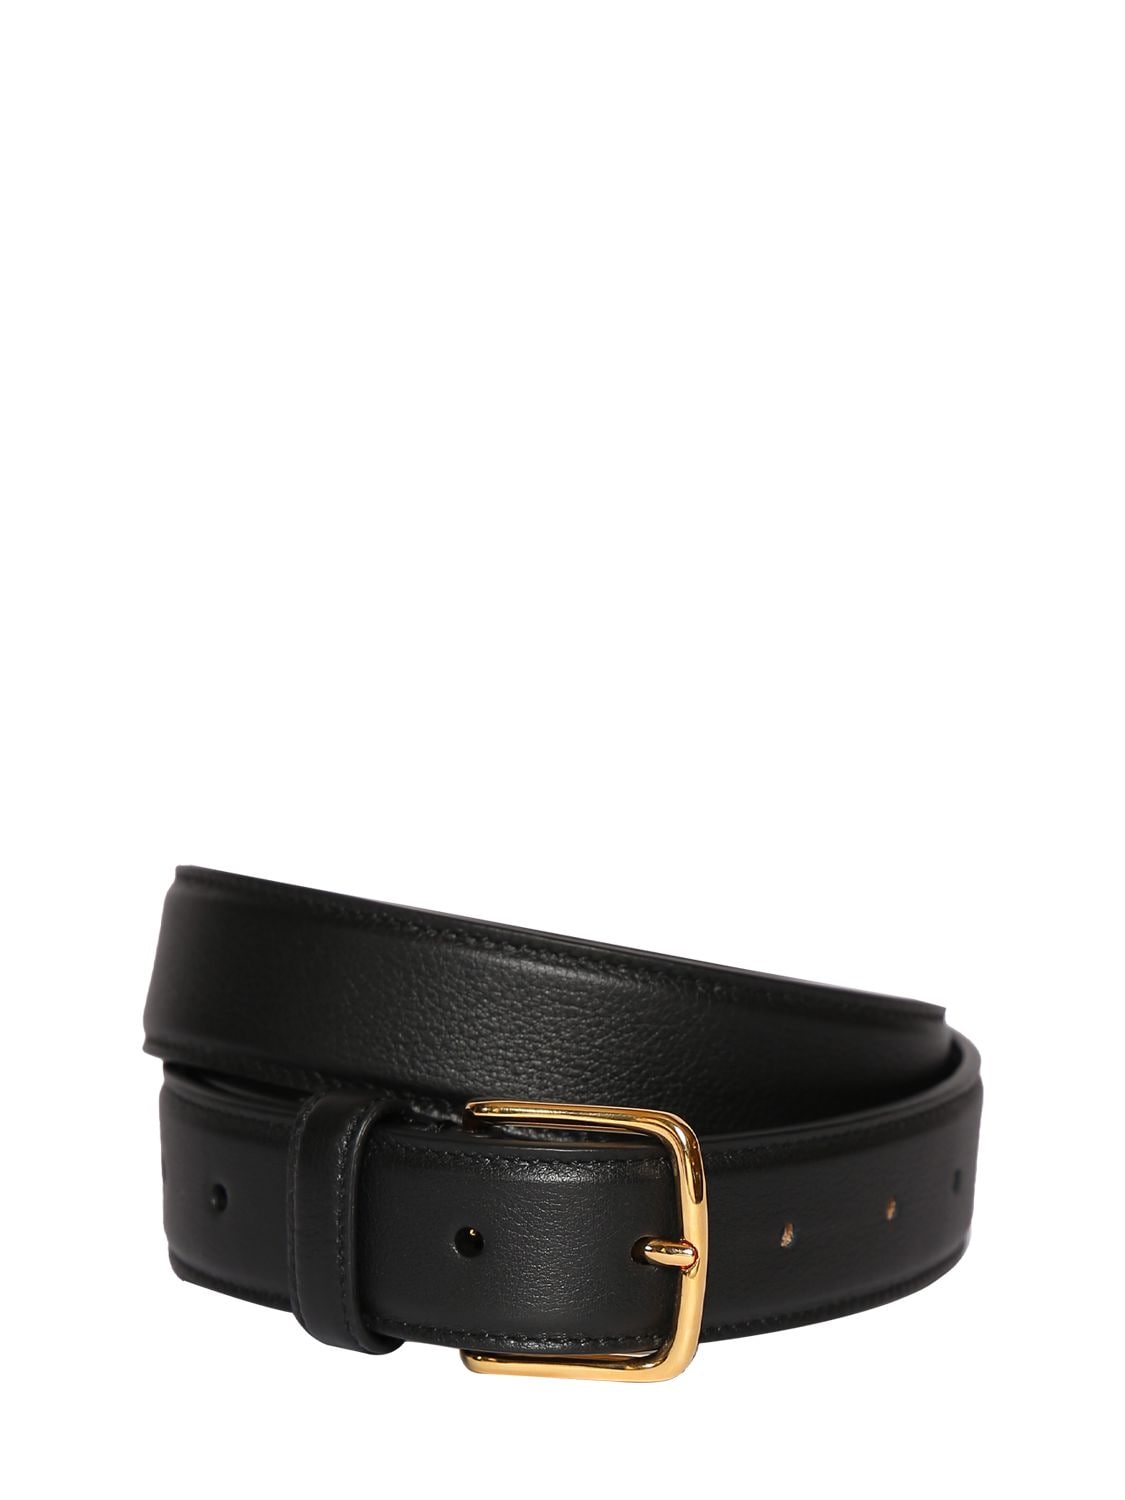 Image of Classic Leather Belt